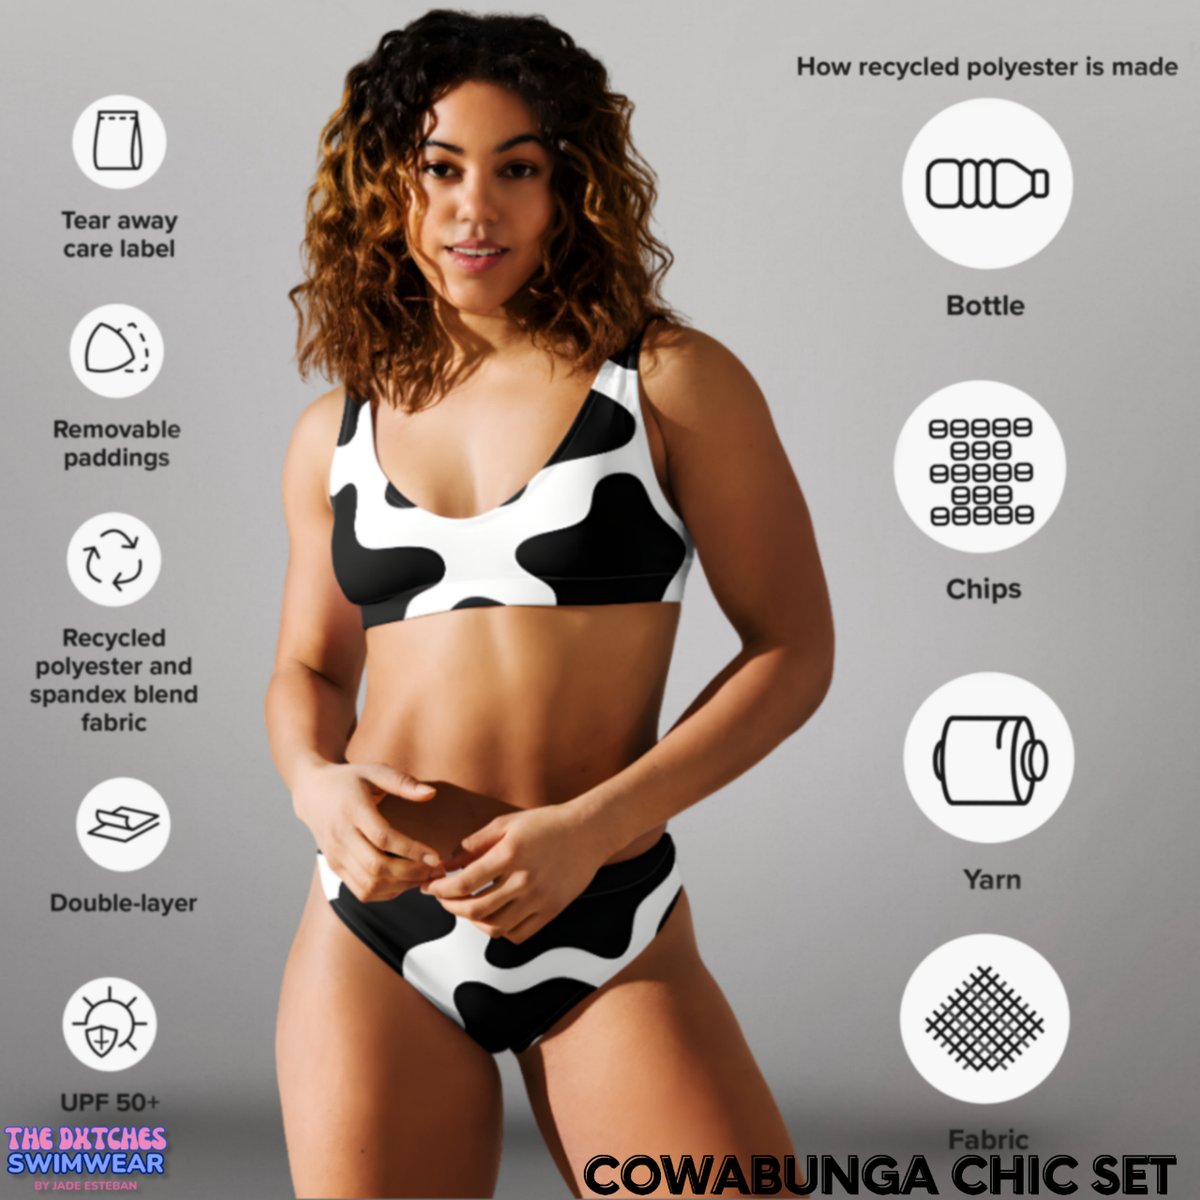 Cowabunga Chic - the perfect blend of style and comfort for your next beach vacation. #cowabungachic #thedxtchesswimwear #swimwear #beach #fashion #style #comfort #luxury #confidence #beauty #adventure #daring #modern #goddess #vacation #sun #sand #waves